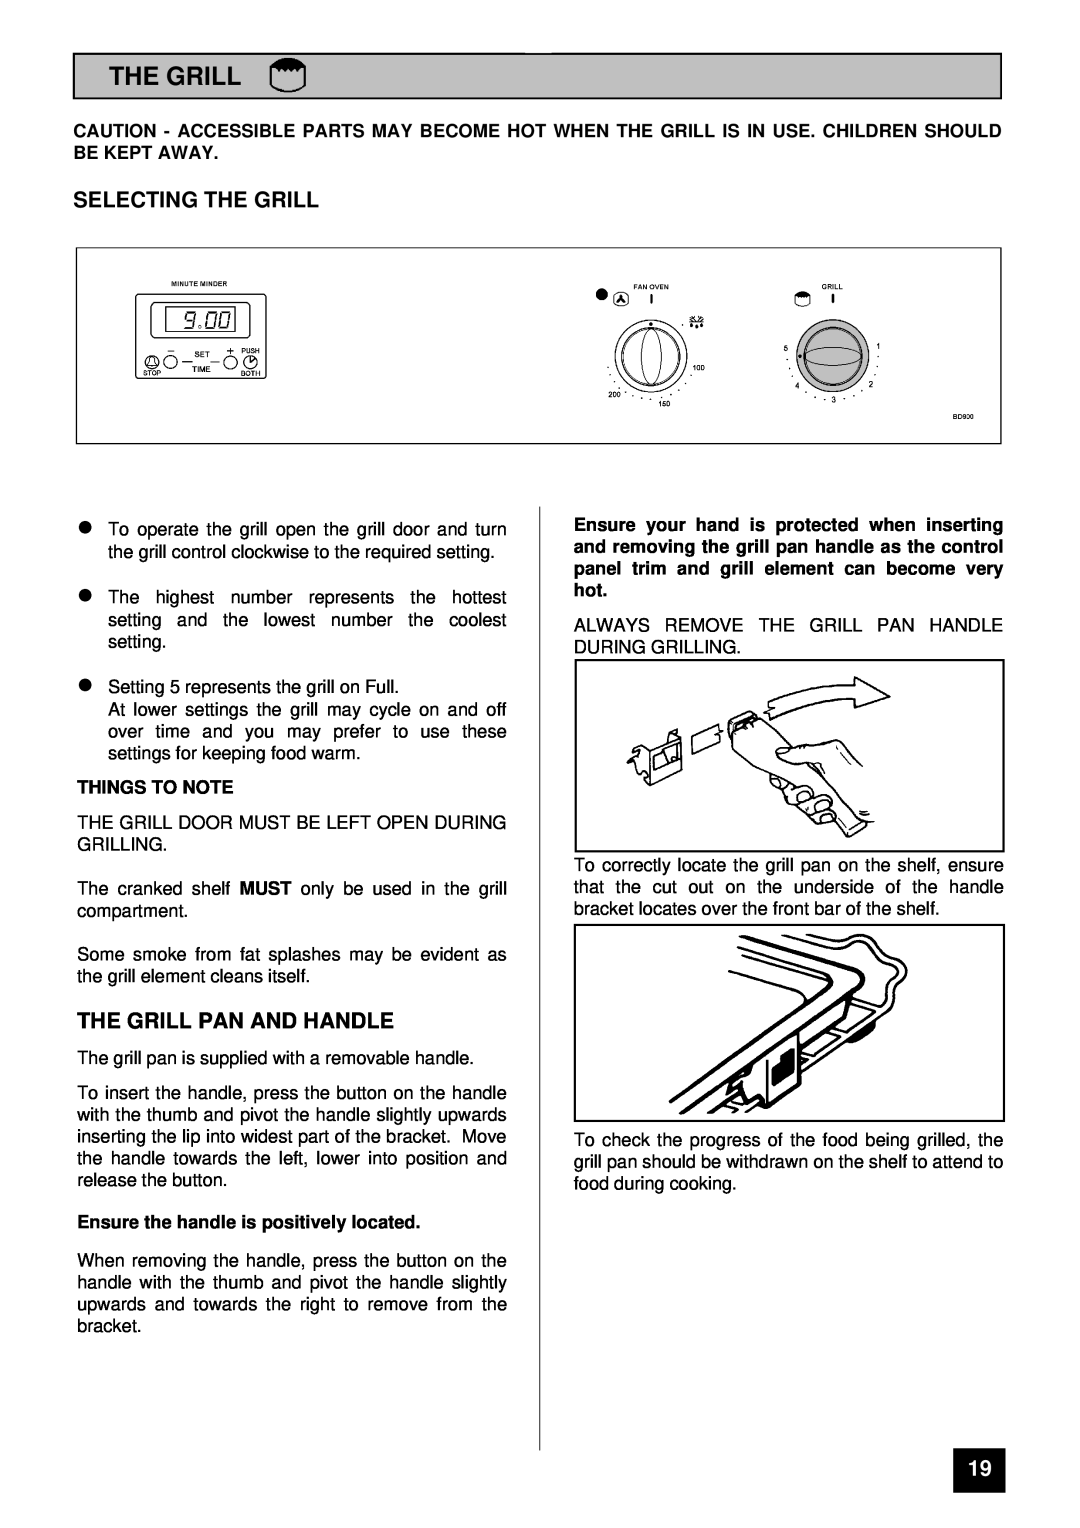 Tricity Bendix BD900 installation instructions Selecting The Grill, The Grill Pan And Handle, Things To Note 